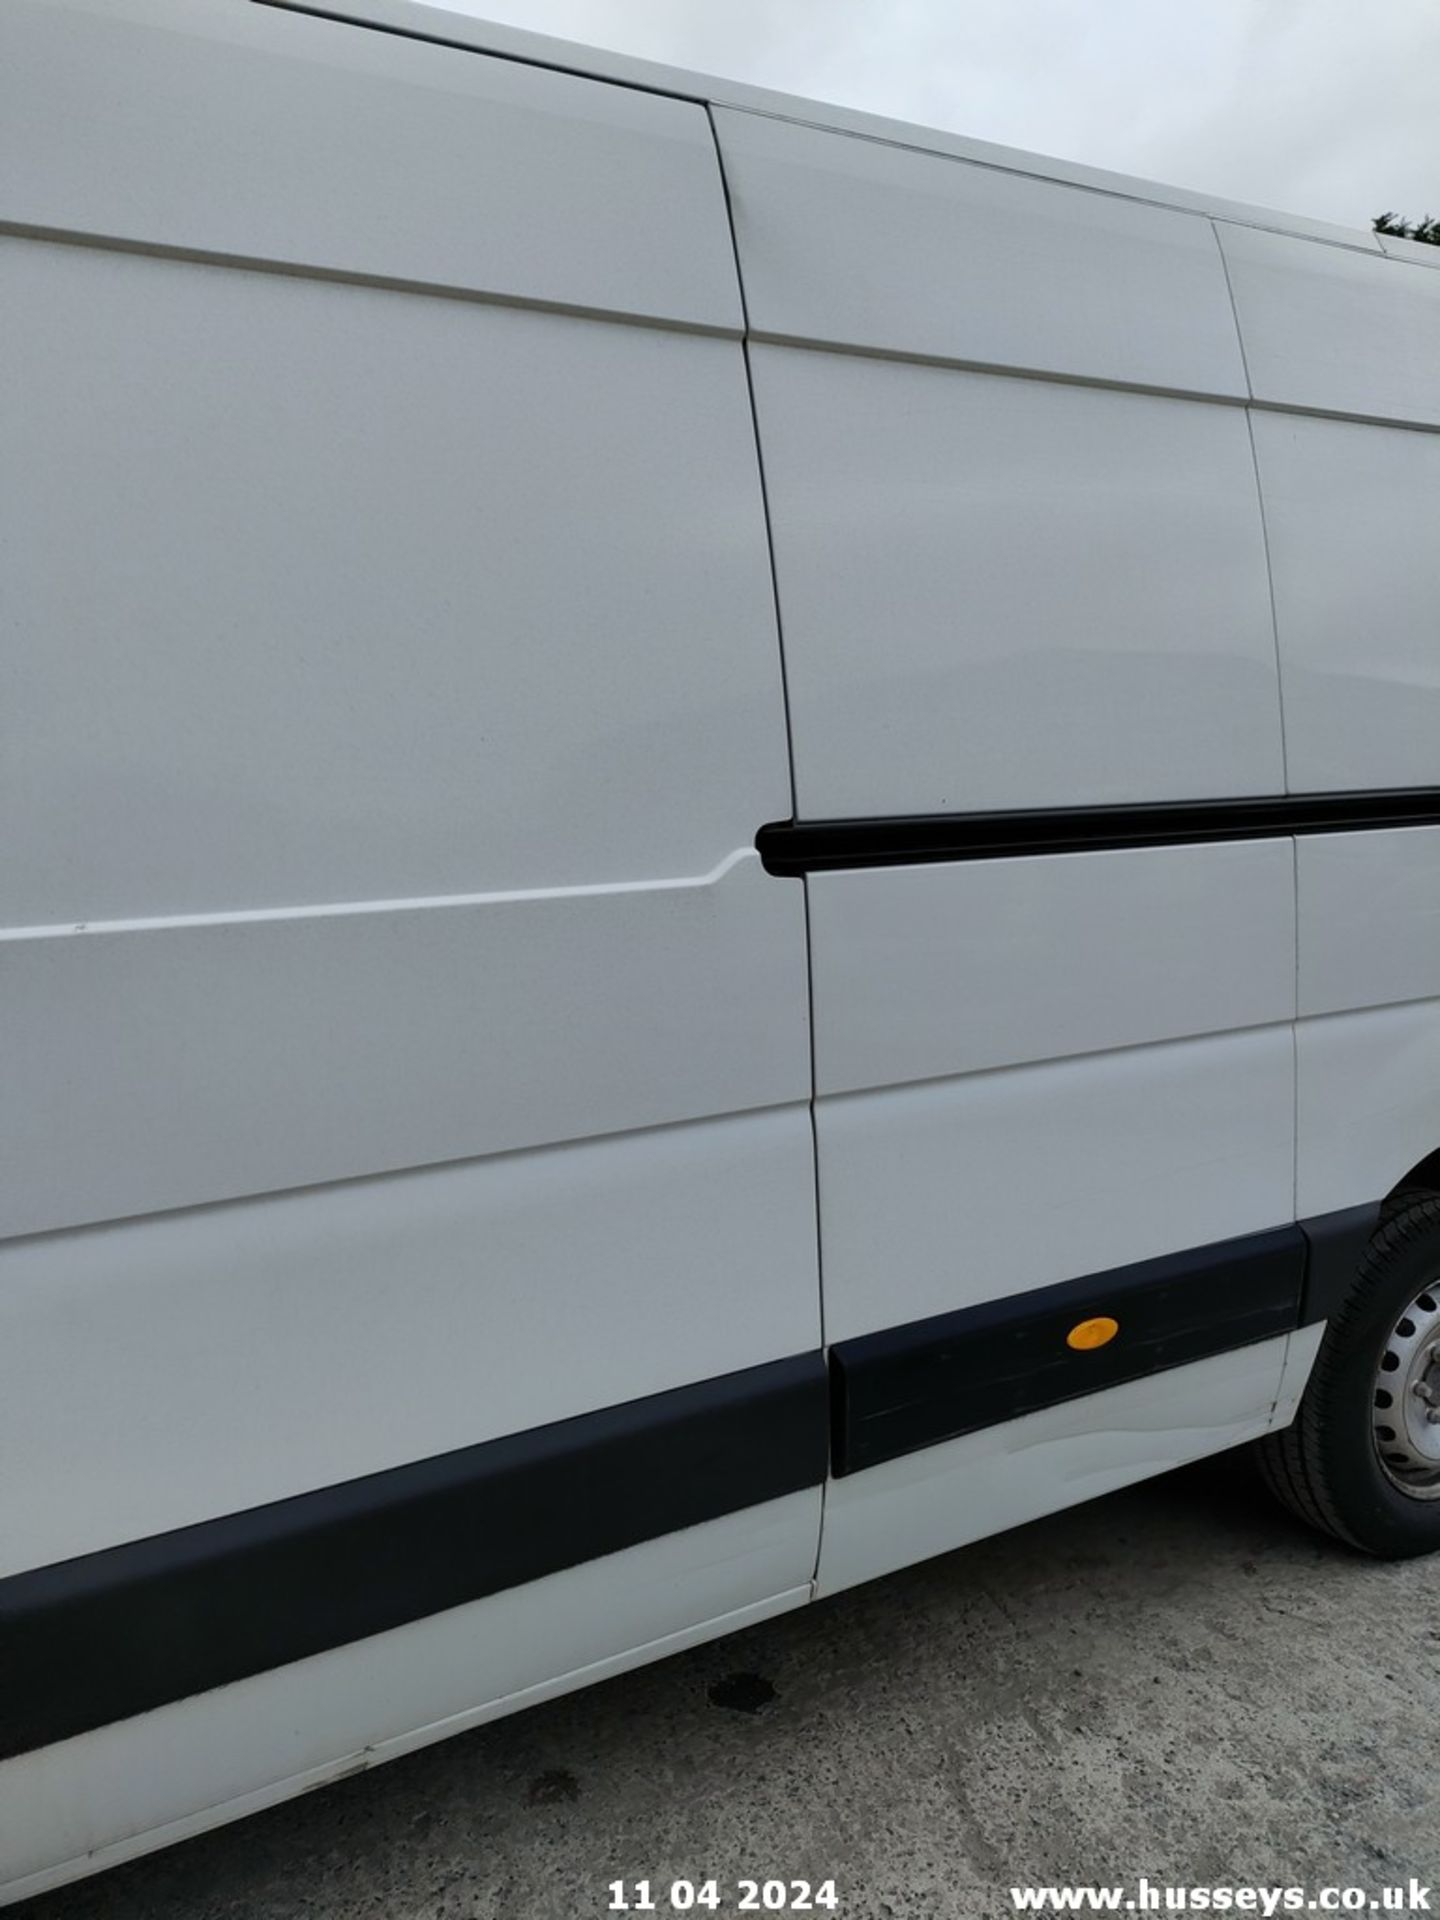 18/68 RENAULT MASTER LM35 BUSINESS DCI - 2298cc 5dr Van (White) - Image 28 of 68